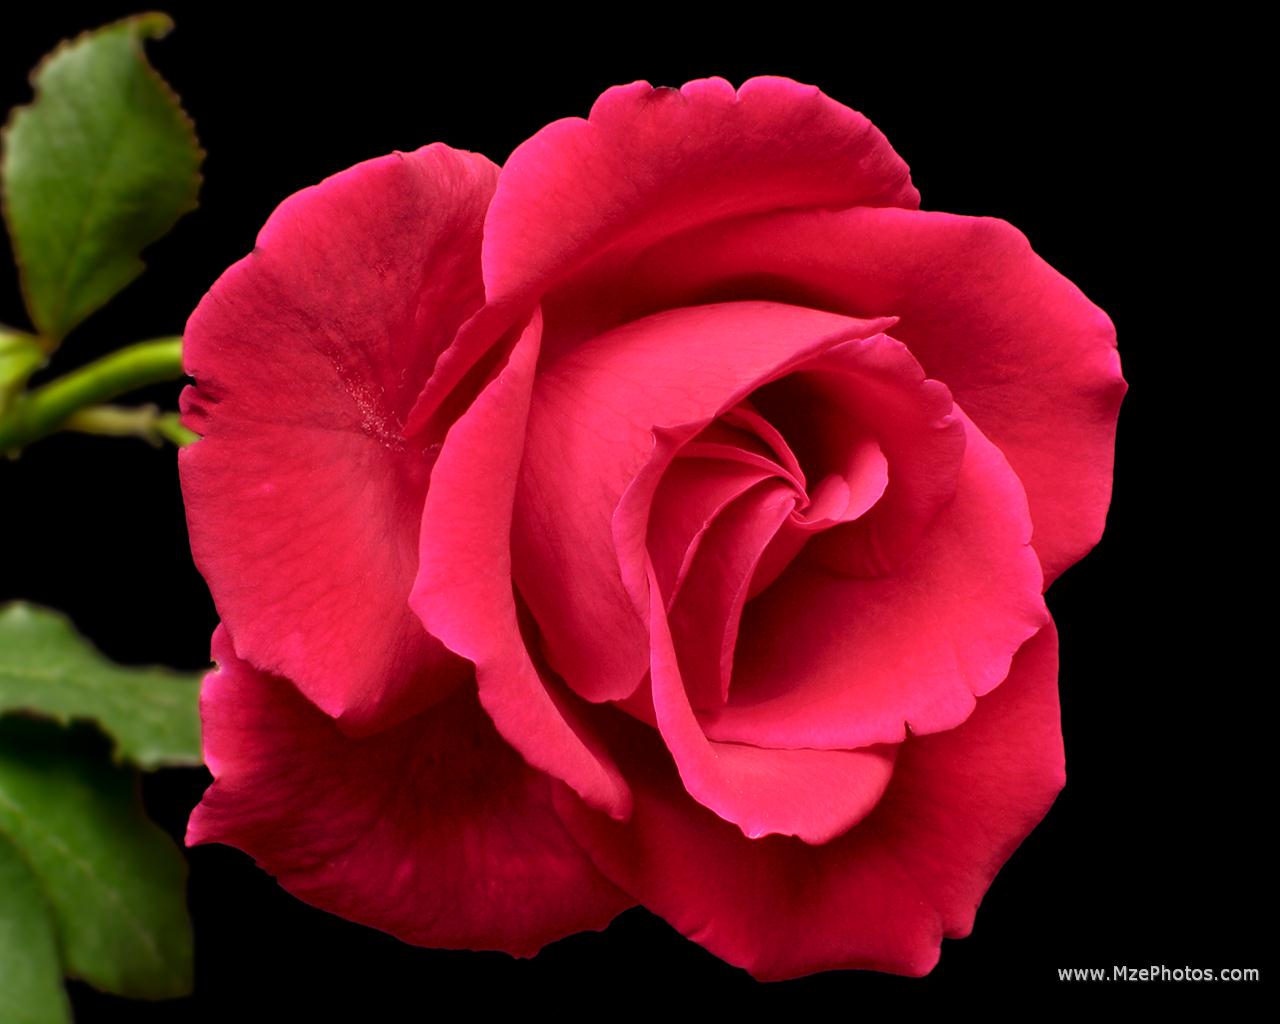 Flower Wallpaper Pictures Red Rose Flowers Gifts